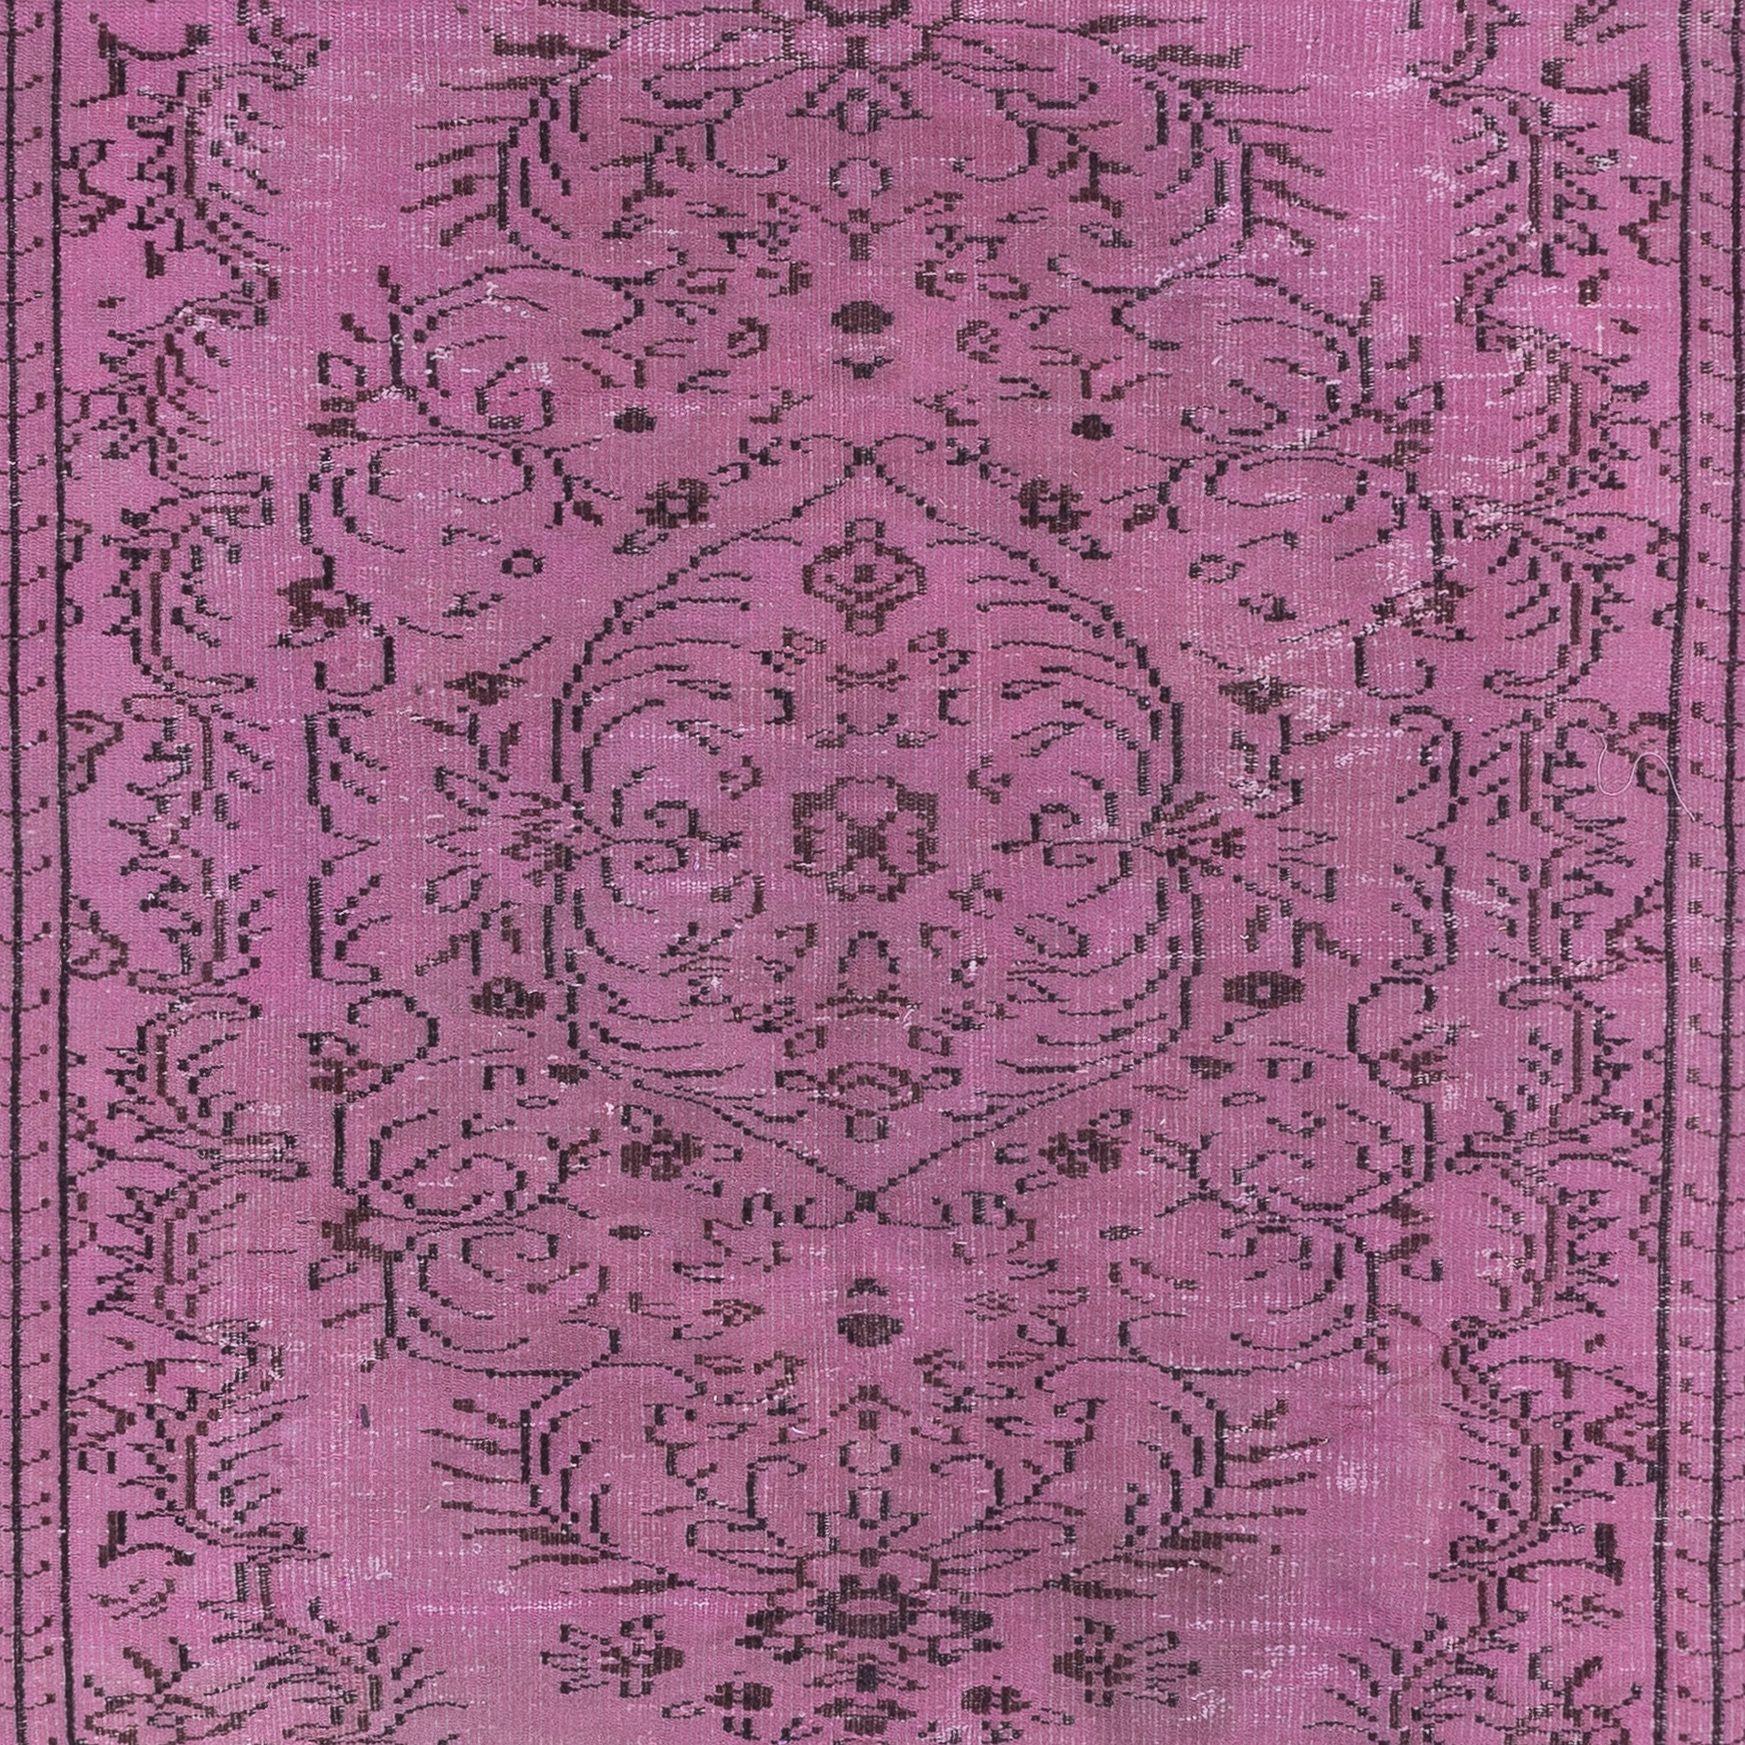 Modern 5.8x8.6 Ft Contemporary Turkish Pink Rug, Handmade Wool Living Room Carpet For Sale